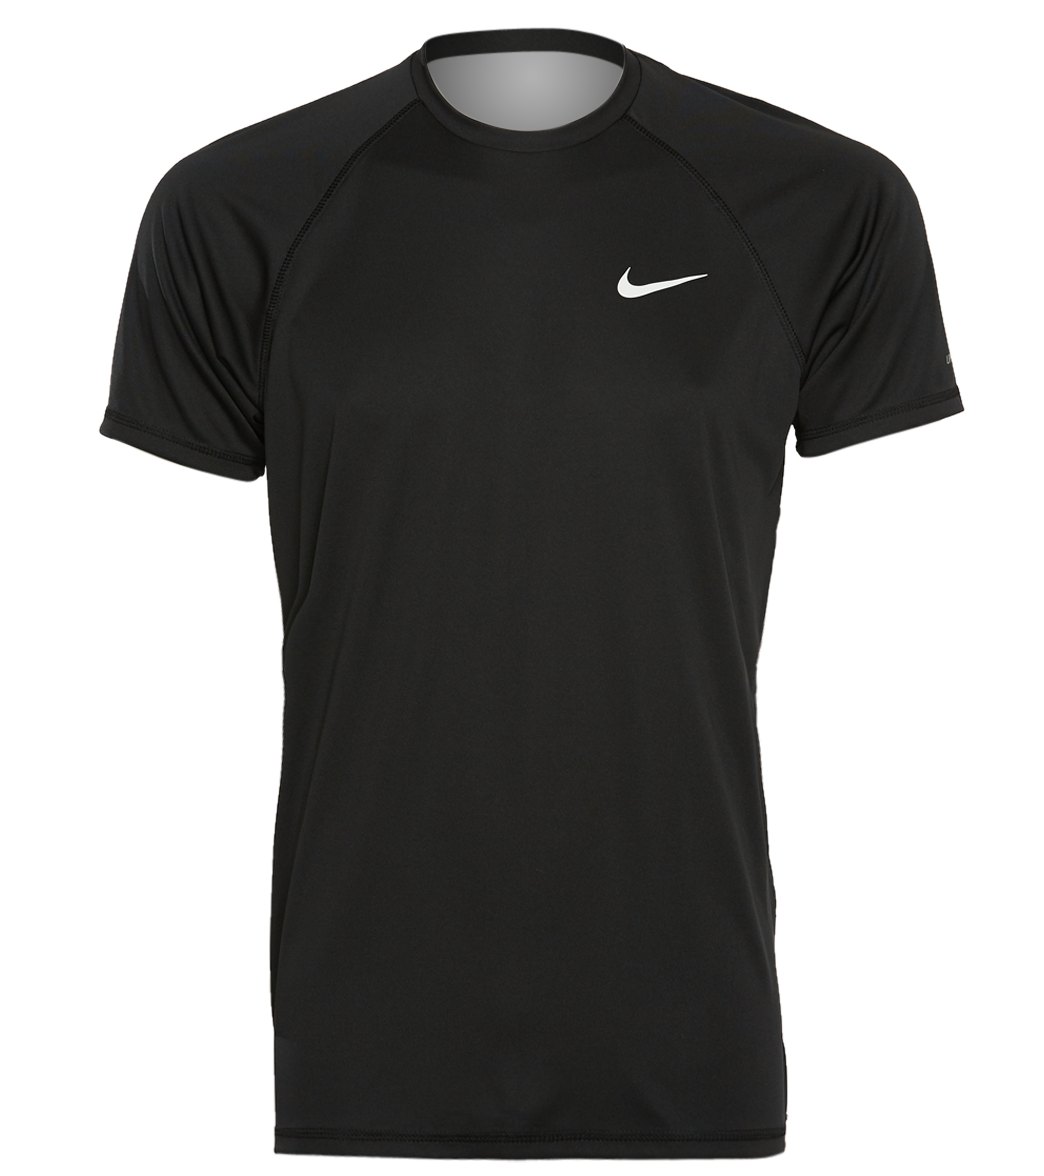 Nike Men's Short Sleeve Extended Size Hydro Rash Guard at SwimOutlet.com